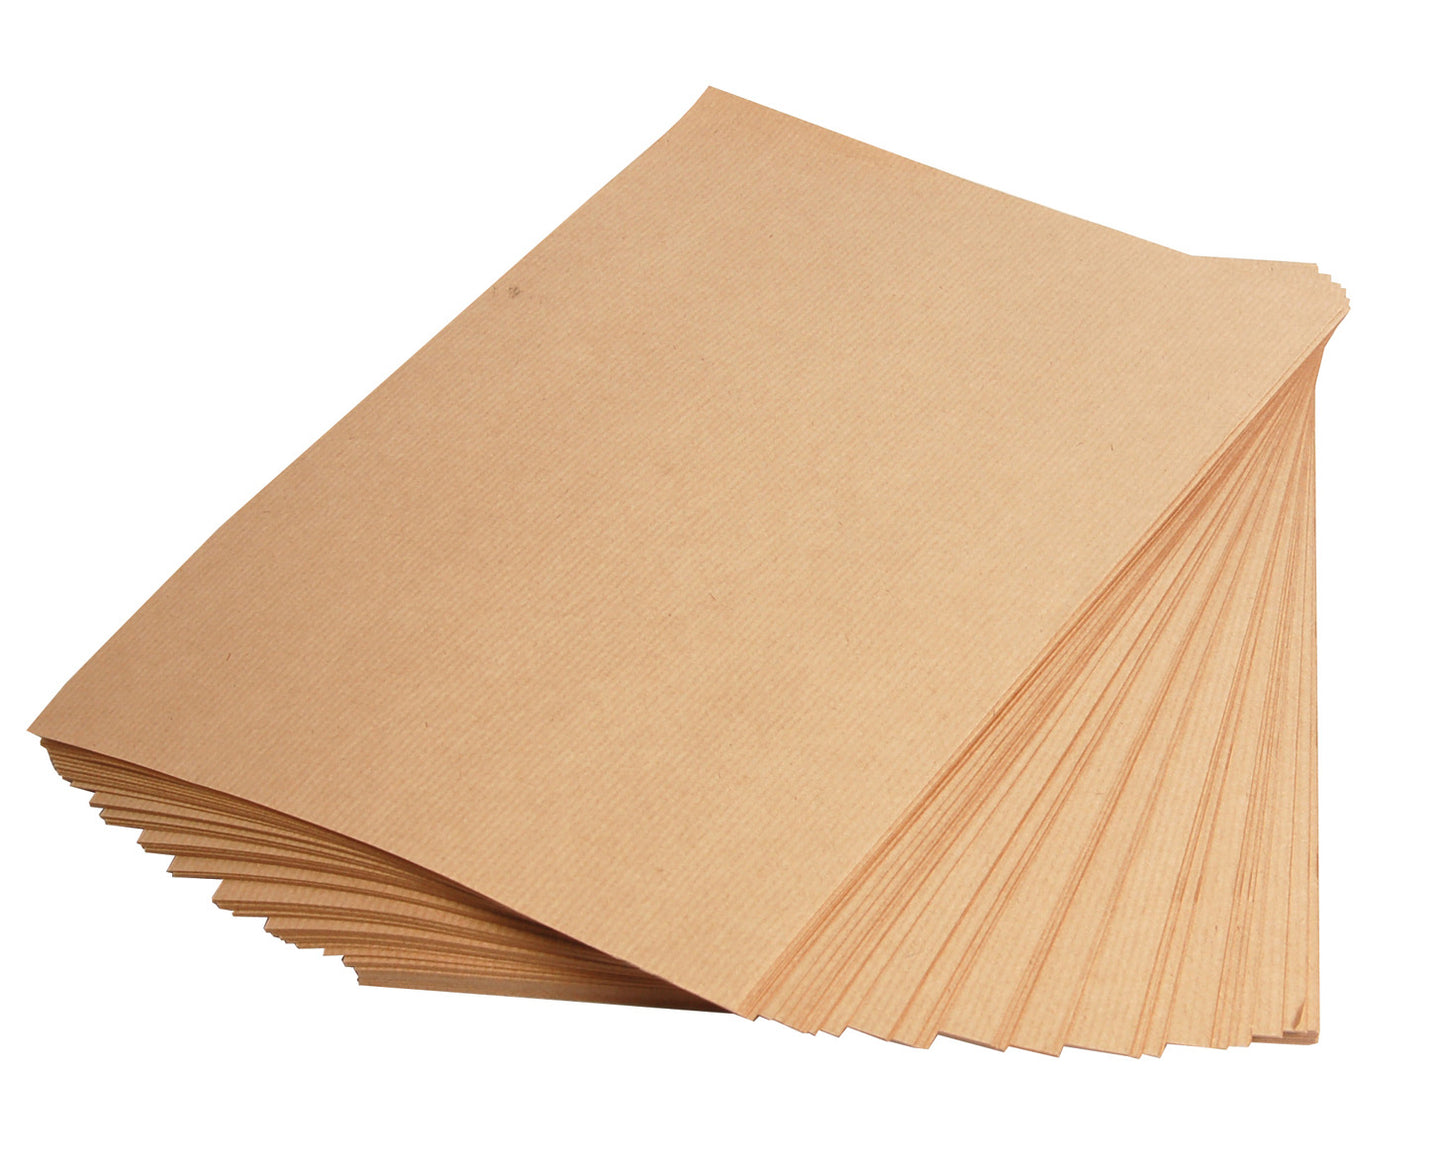 KRAFT PAPER 70GSM - Wrapping paper - Origami large paper